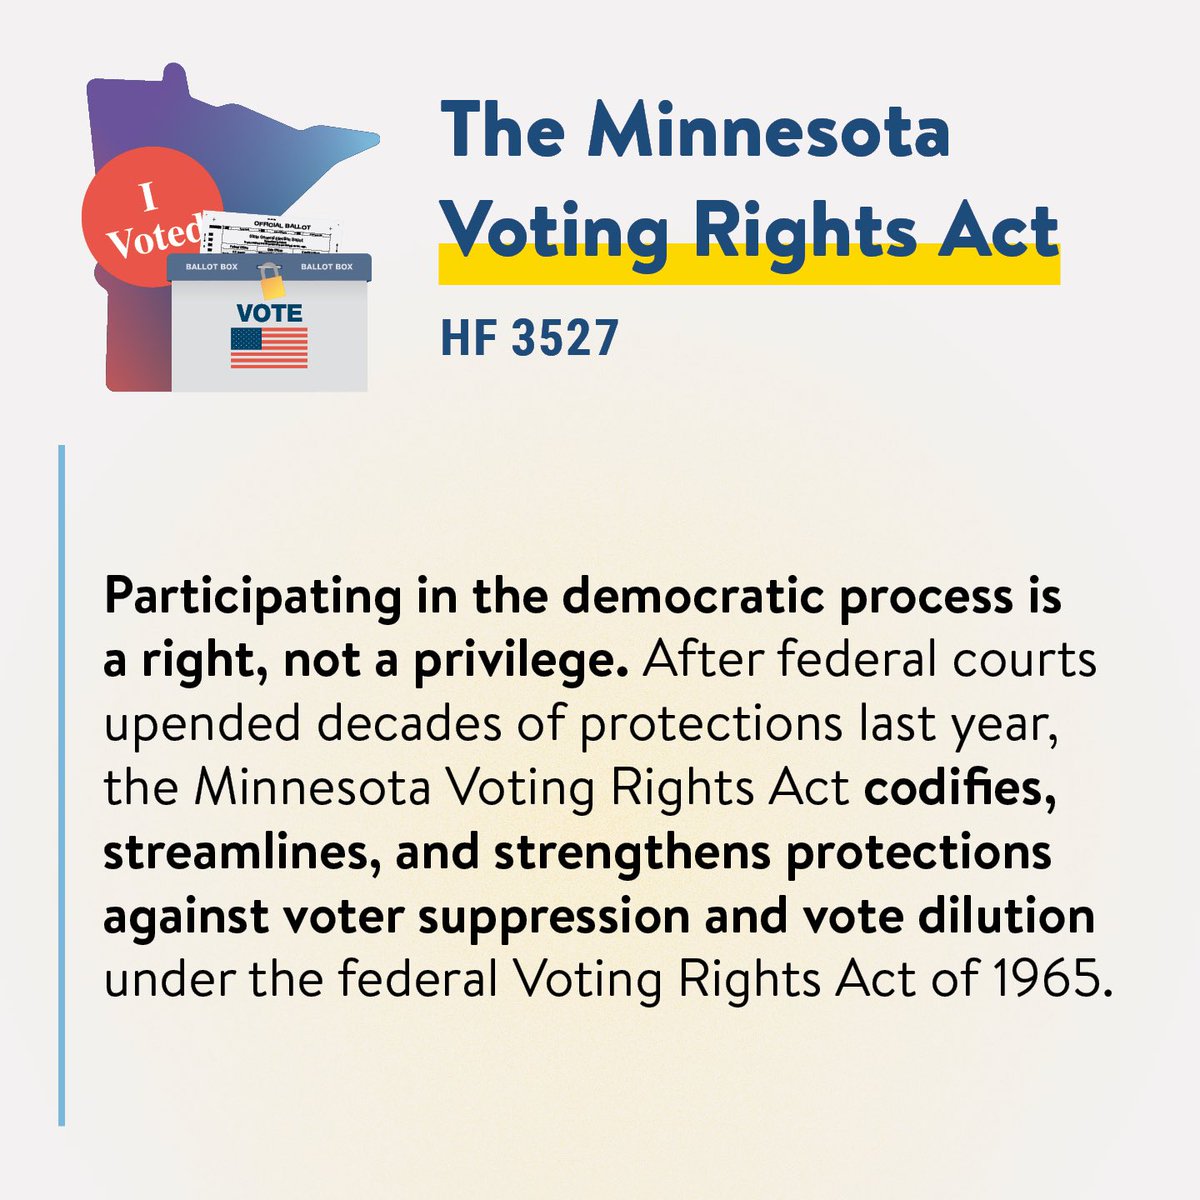 A late night on the #mnleg House floor but it was worth it to pass the Minnesota Voting Rights Act and a great omnibus elections bill that ends prison gerrymandering, expands early voting to voters on campus, and requires the disclosure of spending on dark money political ads.